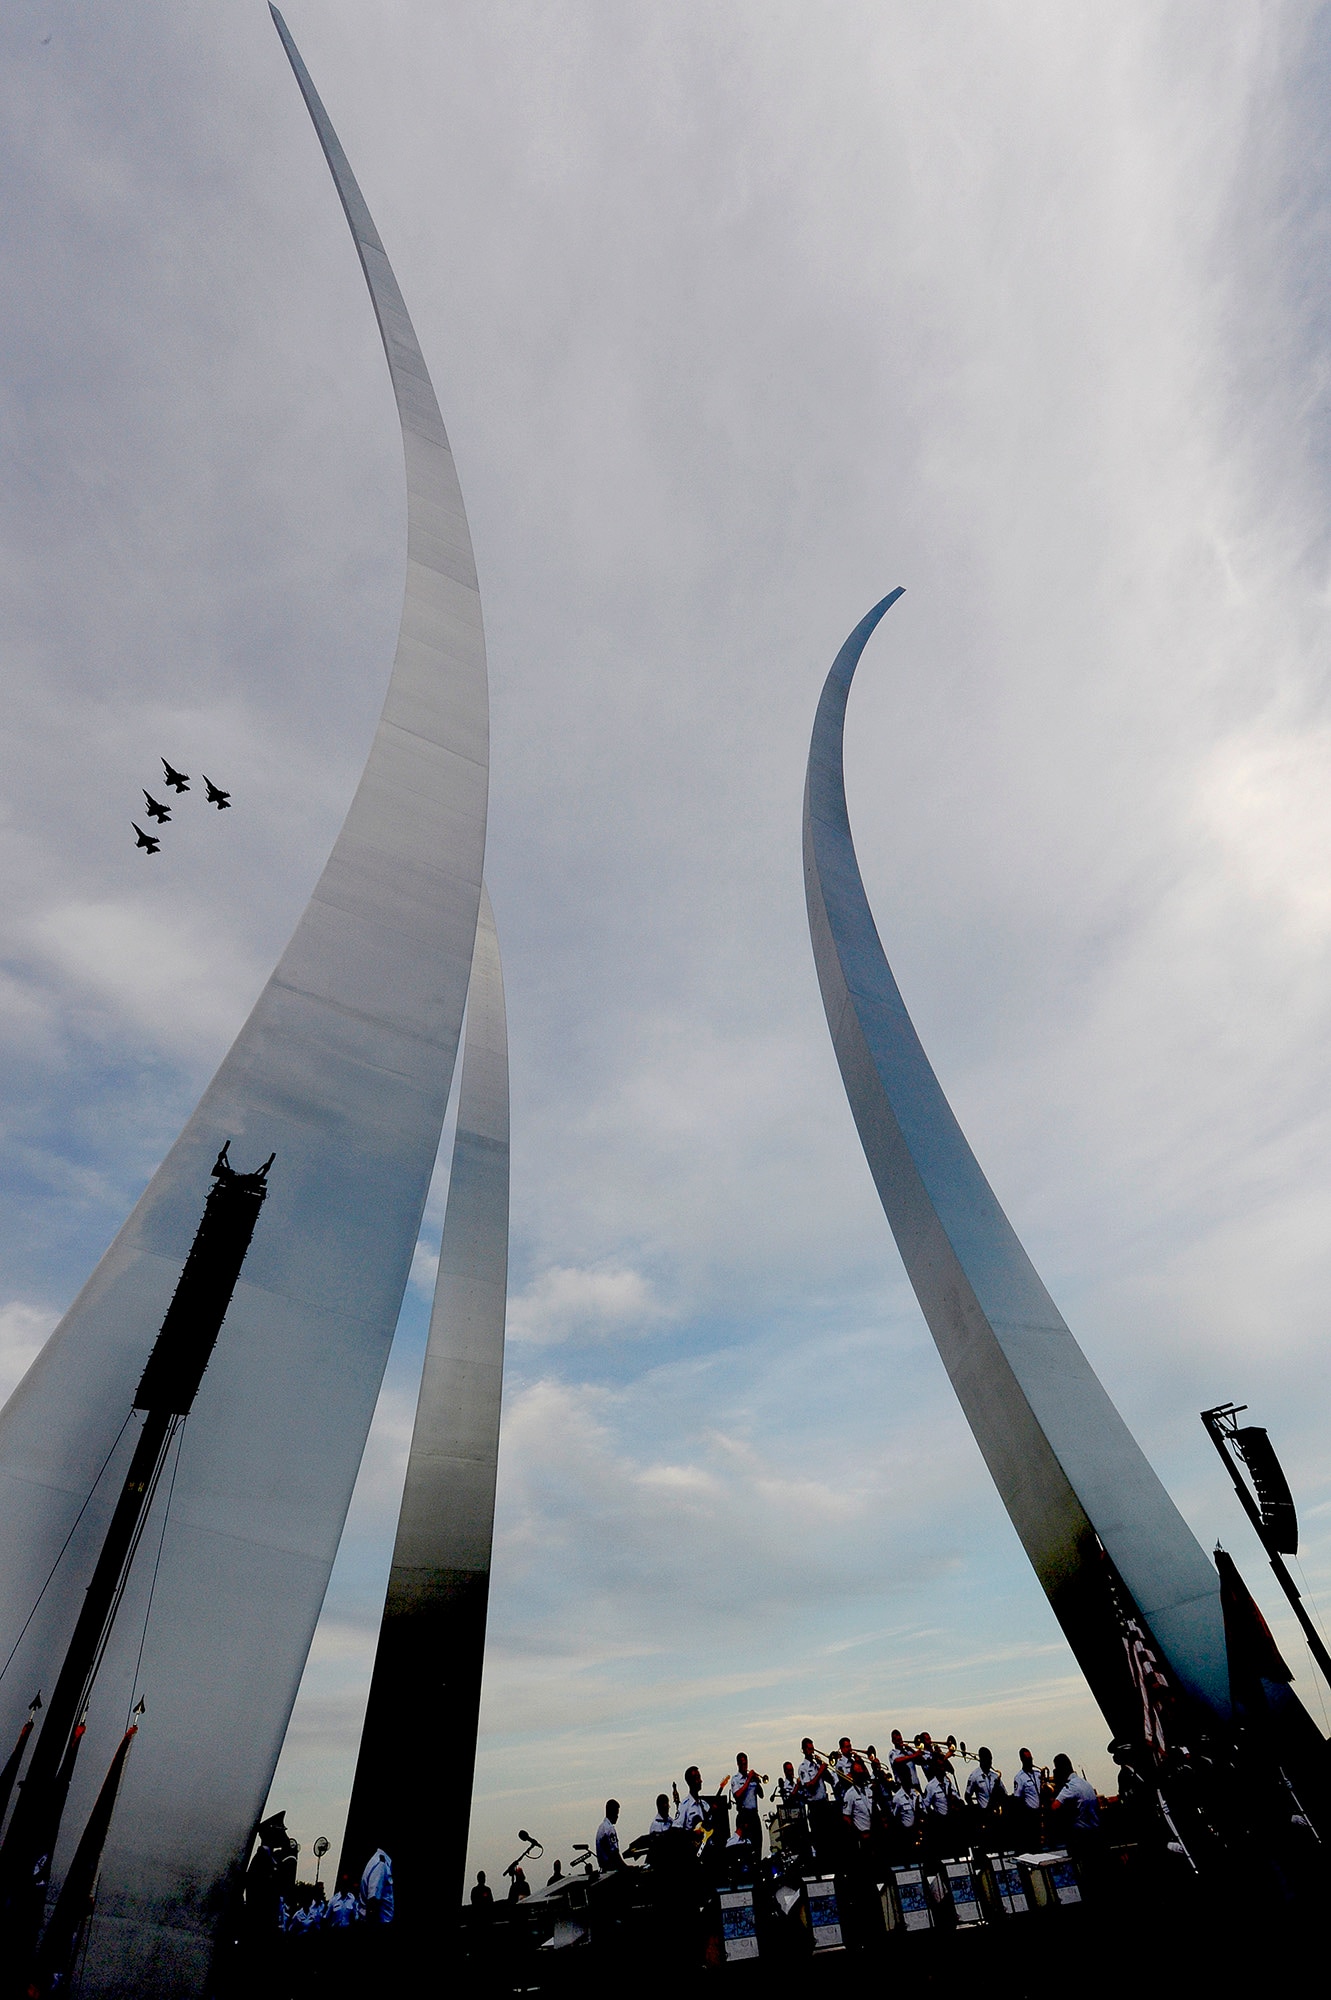 Air Force birthday celebration continues as four F-16 Fighting Falcons fly over the Air Force Memorial during the Air Force Band's summer series, Heritage to Horizons, in Arlington, Va., May 17, 2017. (U.S. Air Force photo/Master Sgt. Bryan Franks)